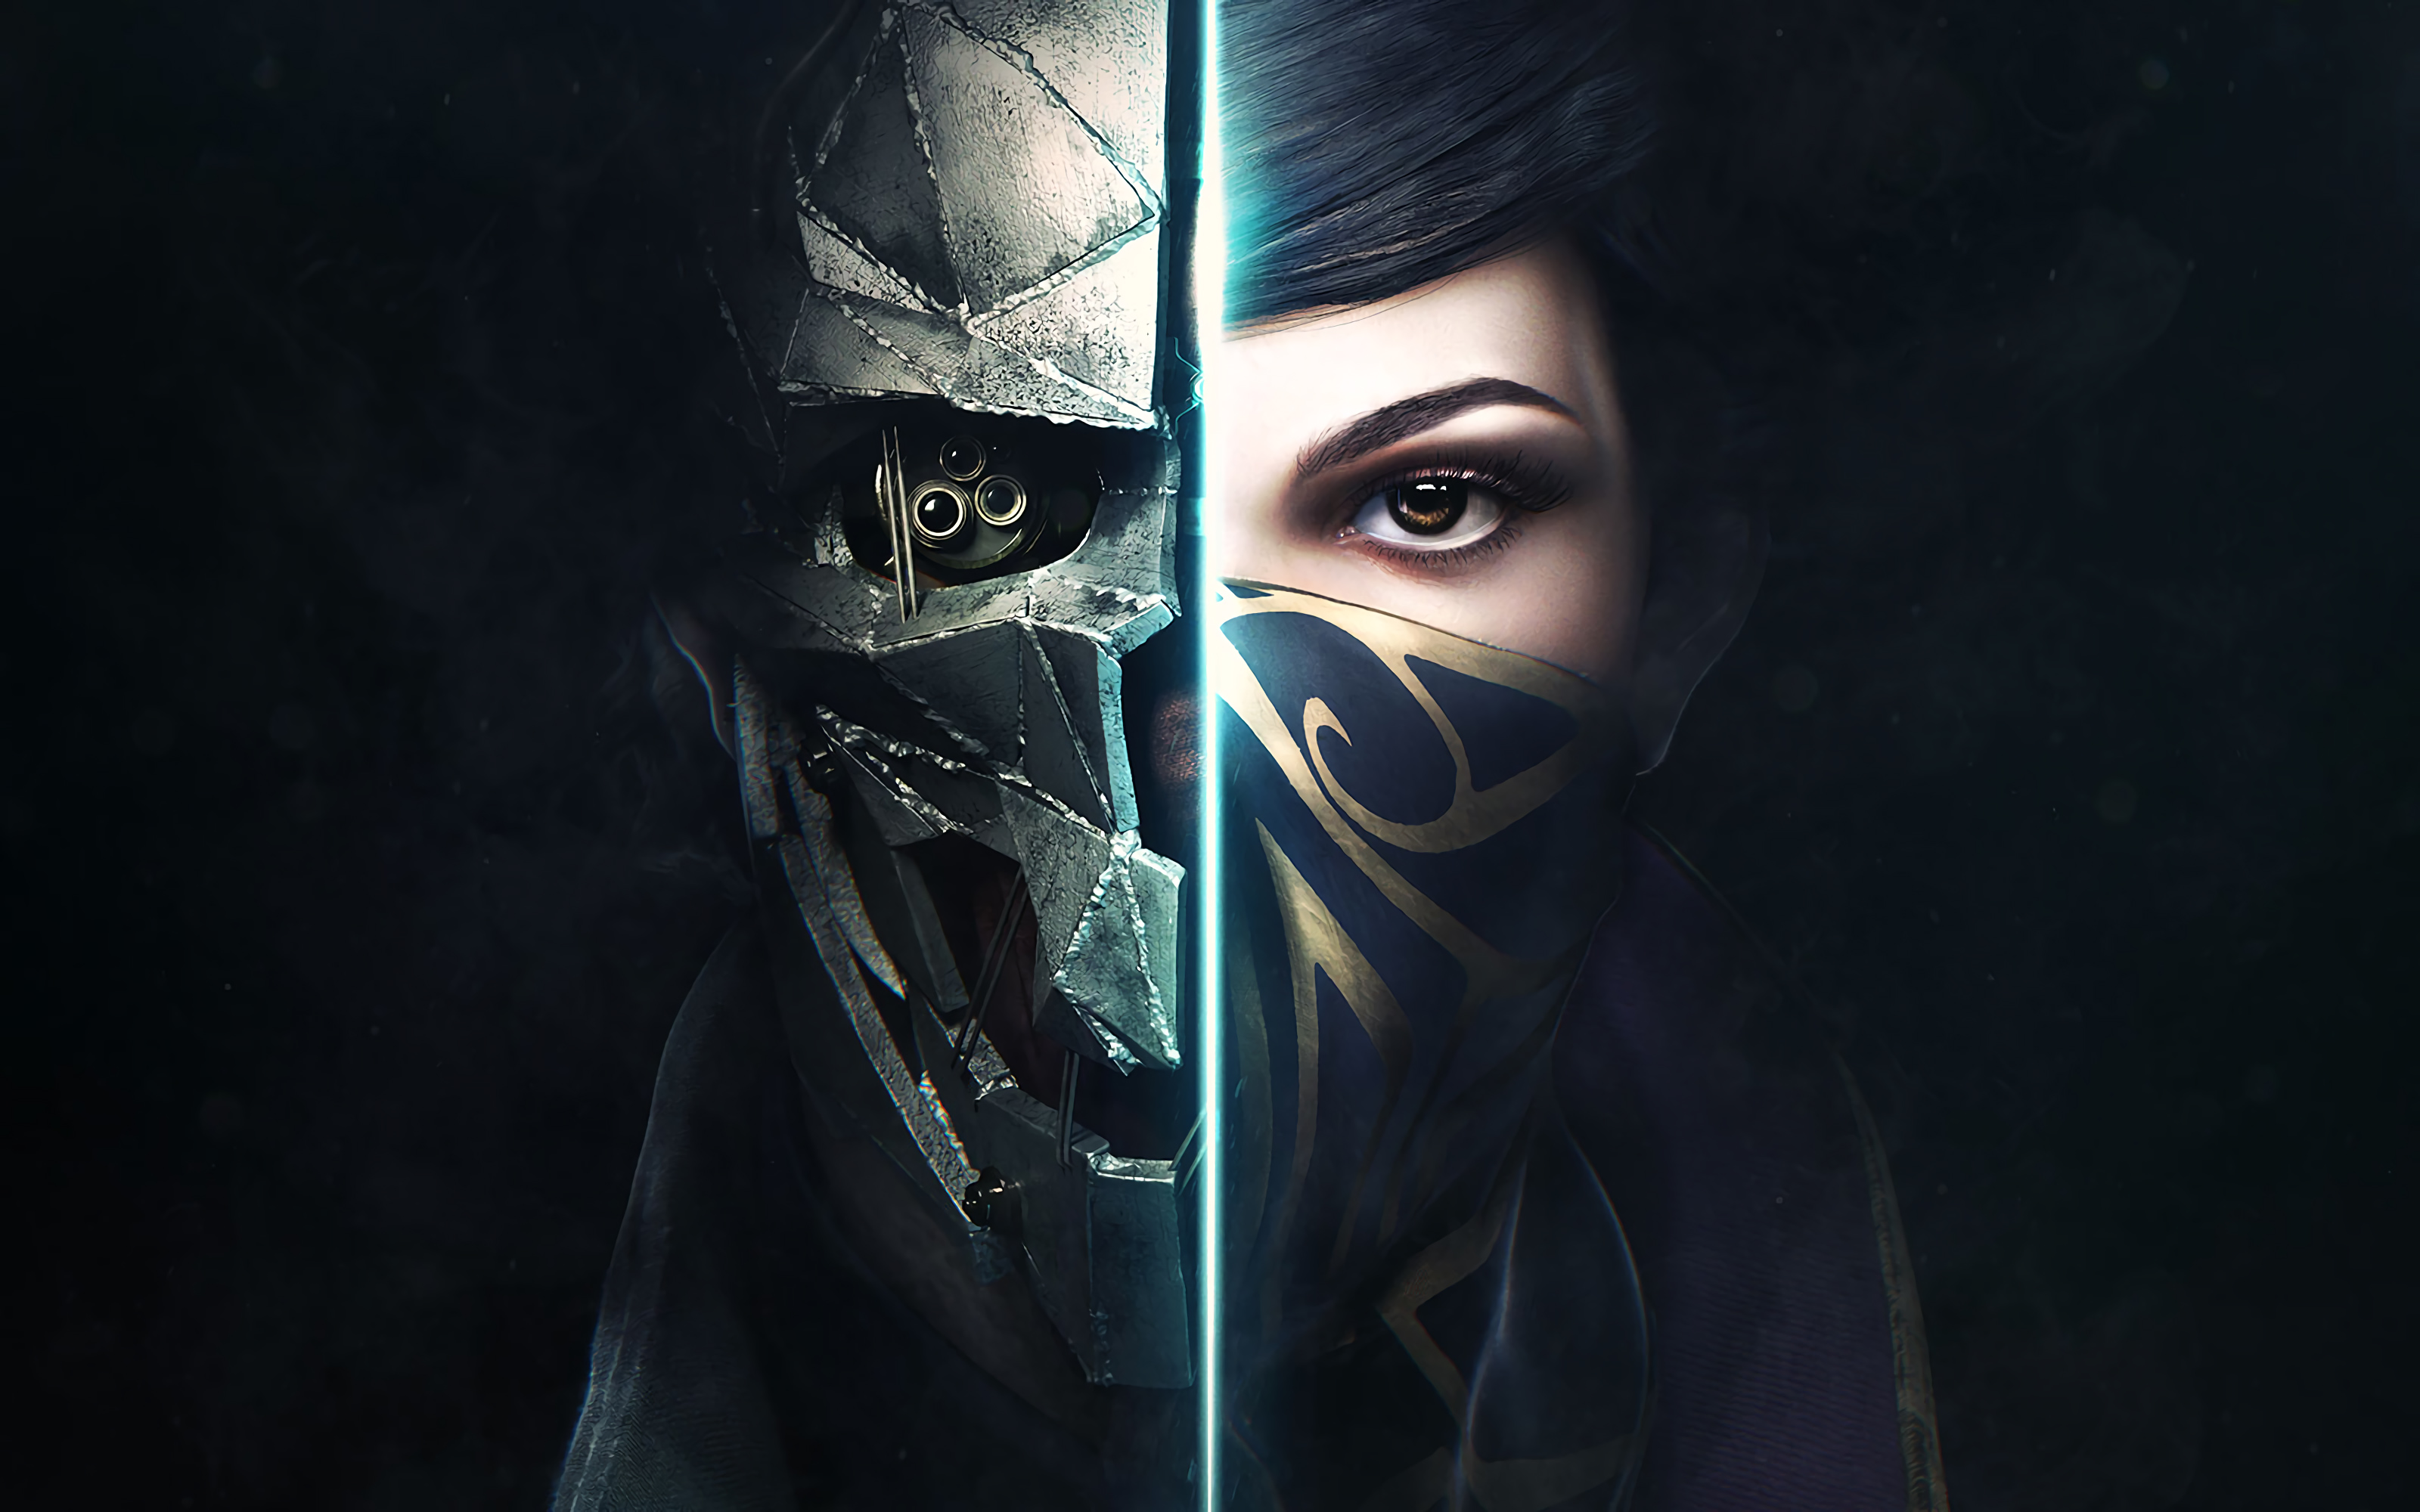 dishonored 2 - Xbox Game Pass October